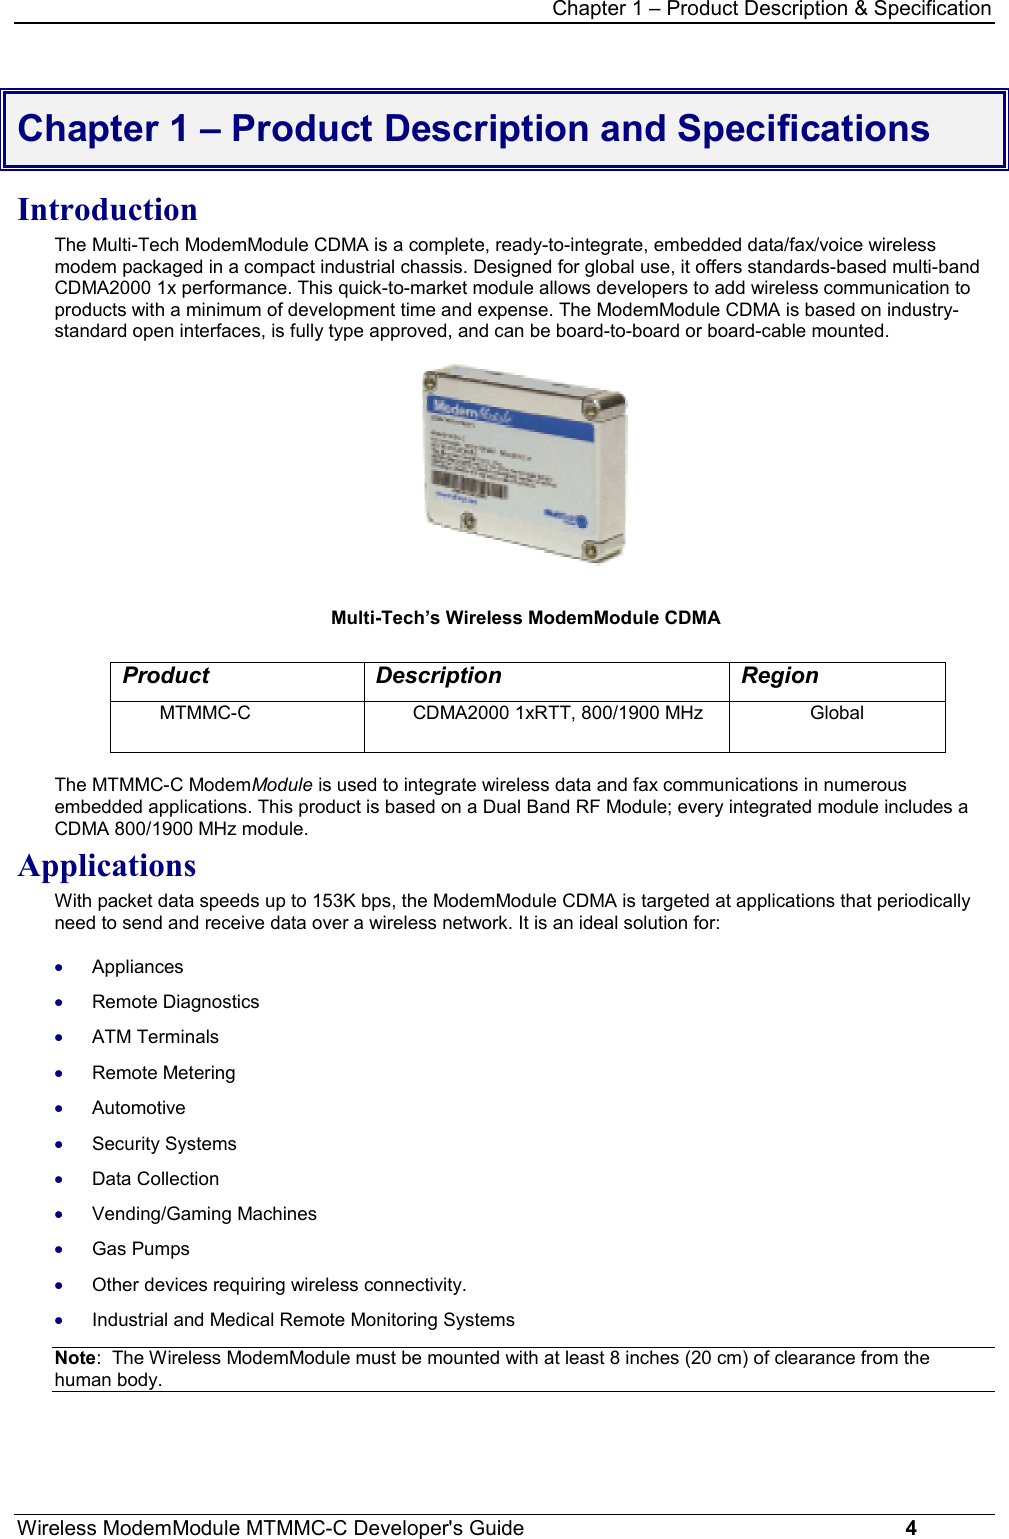 Chapter 1 – Product Description &amp; SpecificationWireless ModemModule MTMMC-C Developer&apos;s Guide     4Chapter 1 – Product Description and SpecificationsIntroductionThe Multi-Tech ModemModule CDMA is a complete, ready-to-integrate, embedded data/fax/voice wirelessmodem packaged in a compact industrial chassis. Designed for global use, it offers standards-based multi-bandCDMA2000 1x performance. This quick-to-market module allows developers to add wireless communication toproducts with a minimum of development time and expense. The ModemModule CDMA is based on industry-standard open interfaces, is fully type approved, and can be board-to-board or board-cable mounted. Multi-Tech’s Wireless ModemModule CDMAProduct Description RegionMTMMC-C CDMA2000 1xRTT, 800/1900 MHz GlobalThe MTMMC-C ModemModule is used to integrate wireless data and fax communications in numerousembedded applications. This product is based on a Dual Band RF Module; every integrated module includes aCDMA 800/1900 MHz module.ApplicationsWith packet data speeds up to 153K bps, the ModemModule CDMA is targeted at applications that periodicallyneed to send and receive data over a wireless network. It is an ideal solution for:· Appliances· Remote Diagnostics· ATM Terminals· Remote Metering· Automotive· Security Systems· Data Collection· Vending/Gaming Machines· Gas Pumps· Other devices requiring wireless connectivity.· Industrial and Medical Remote Monitoring SystemsNote:  The Wireless ModemModule must be mounted with at least 8 inches (20 cm) of clearance from thehuman body.